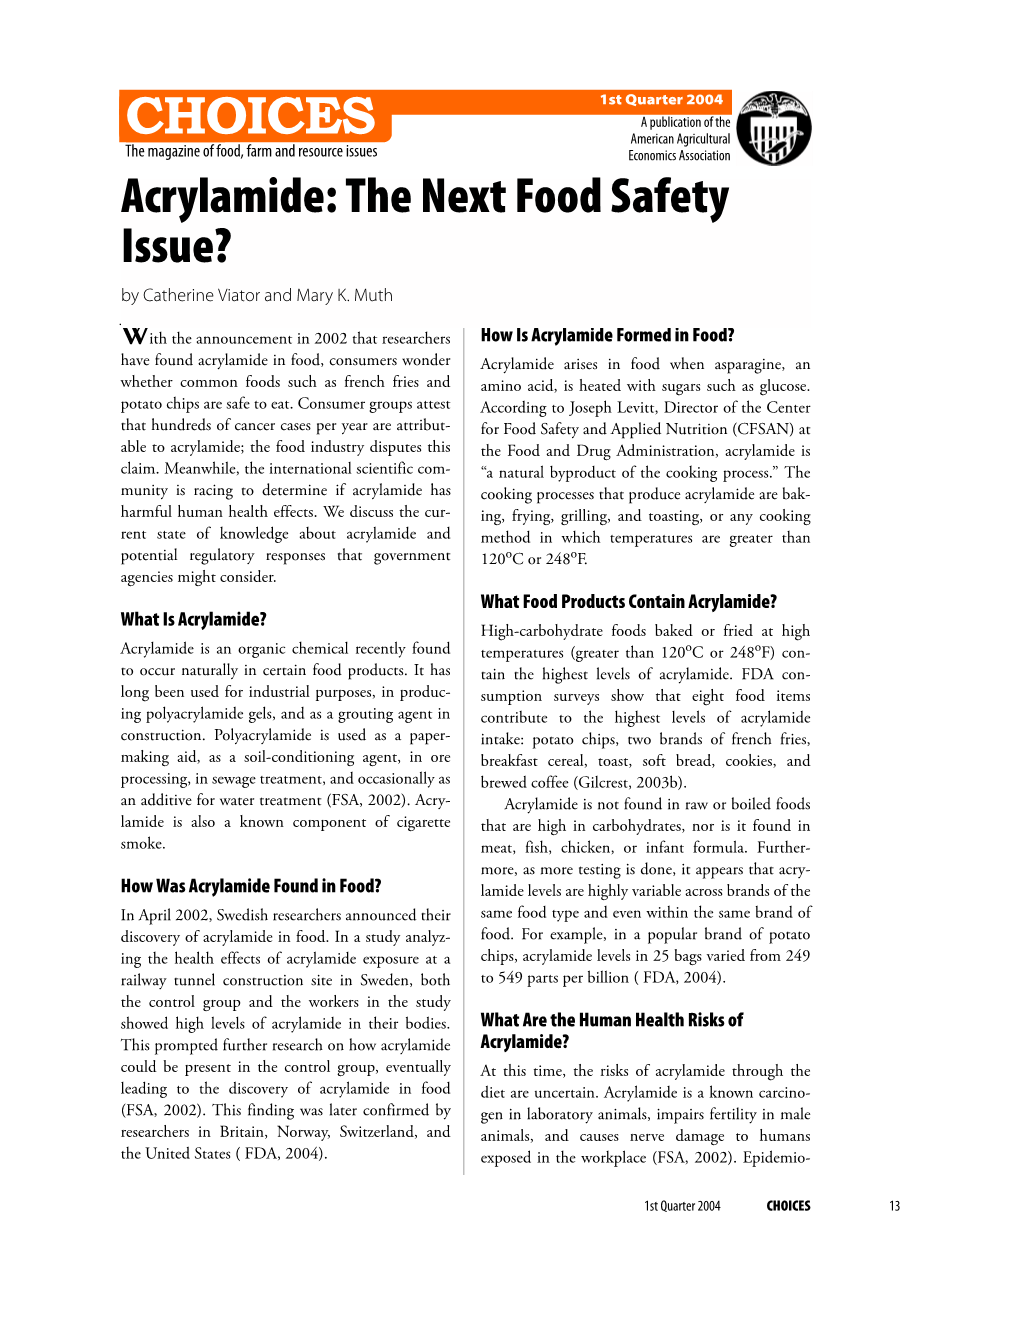 Acrylamide: the Next Food Safety Issue? by Catherine Viator and Mary K